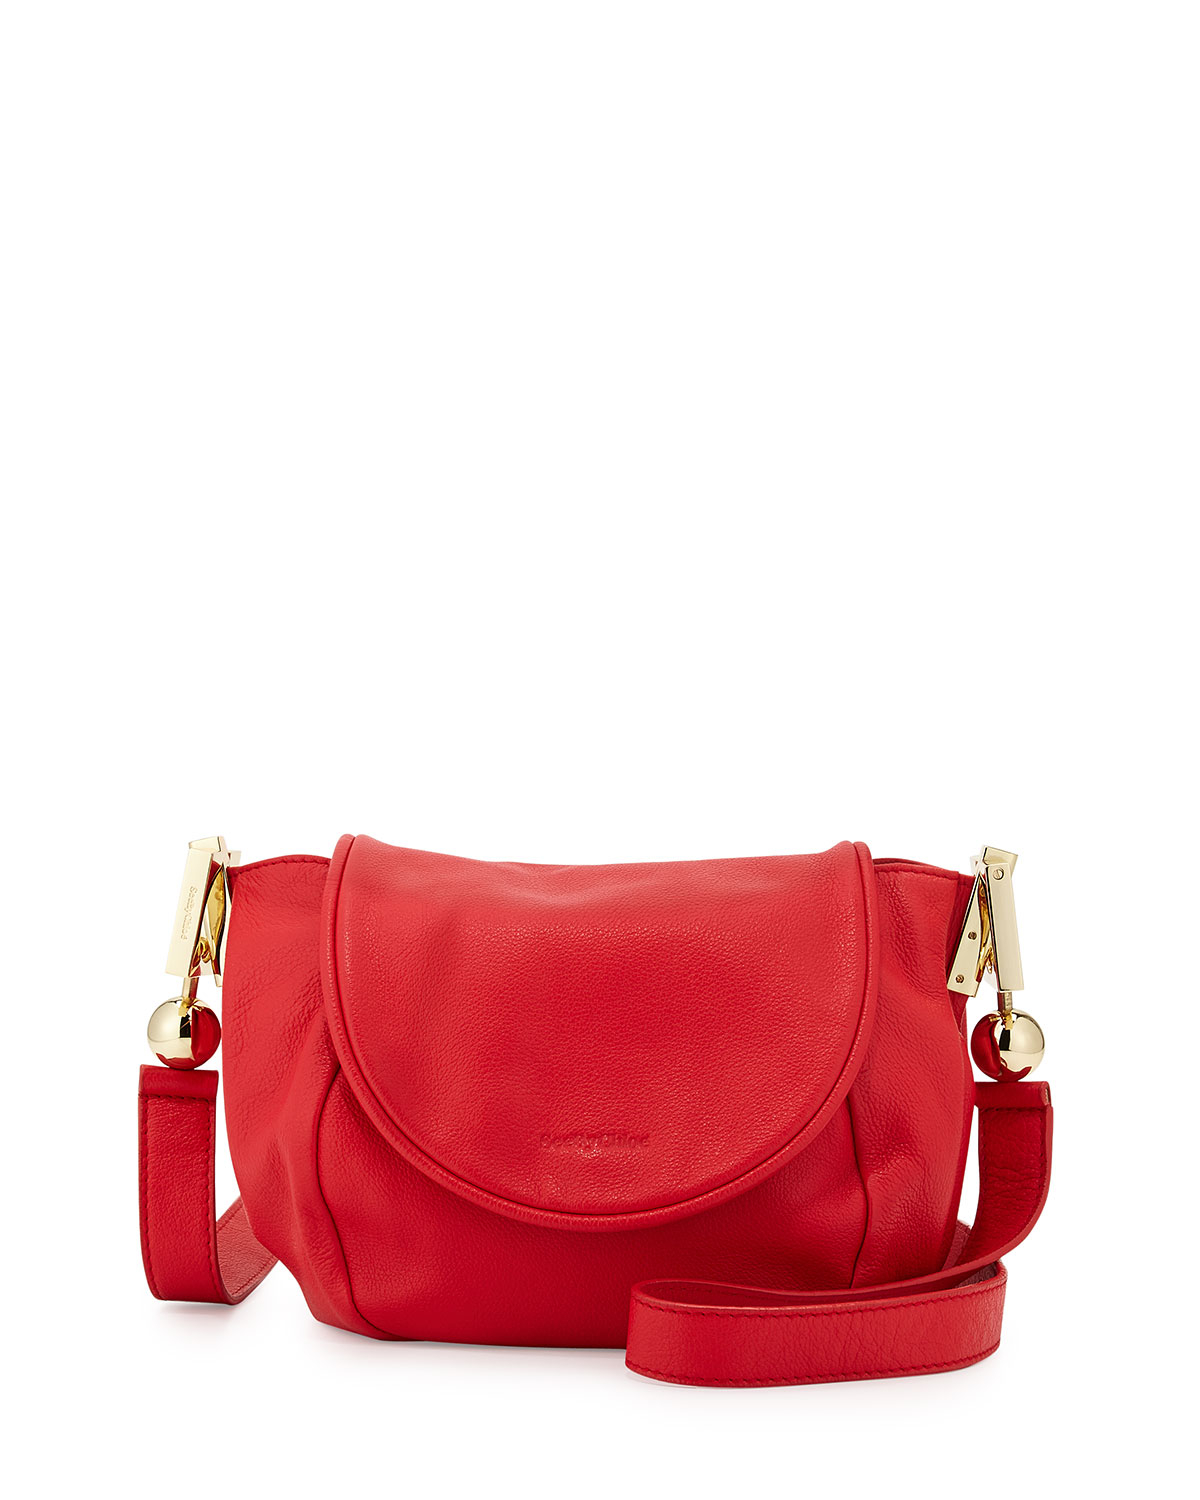 See by chloé Lena Vachetta Leather Crossbody Bag in Red (FLAMBOYANT RED) | Lyst